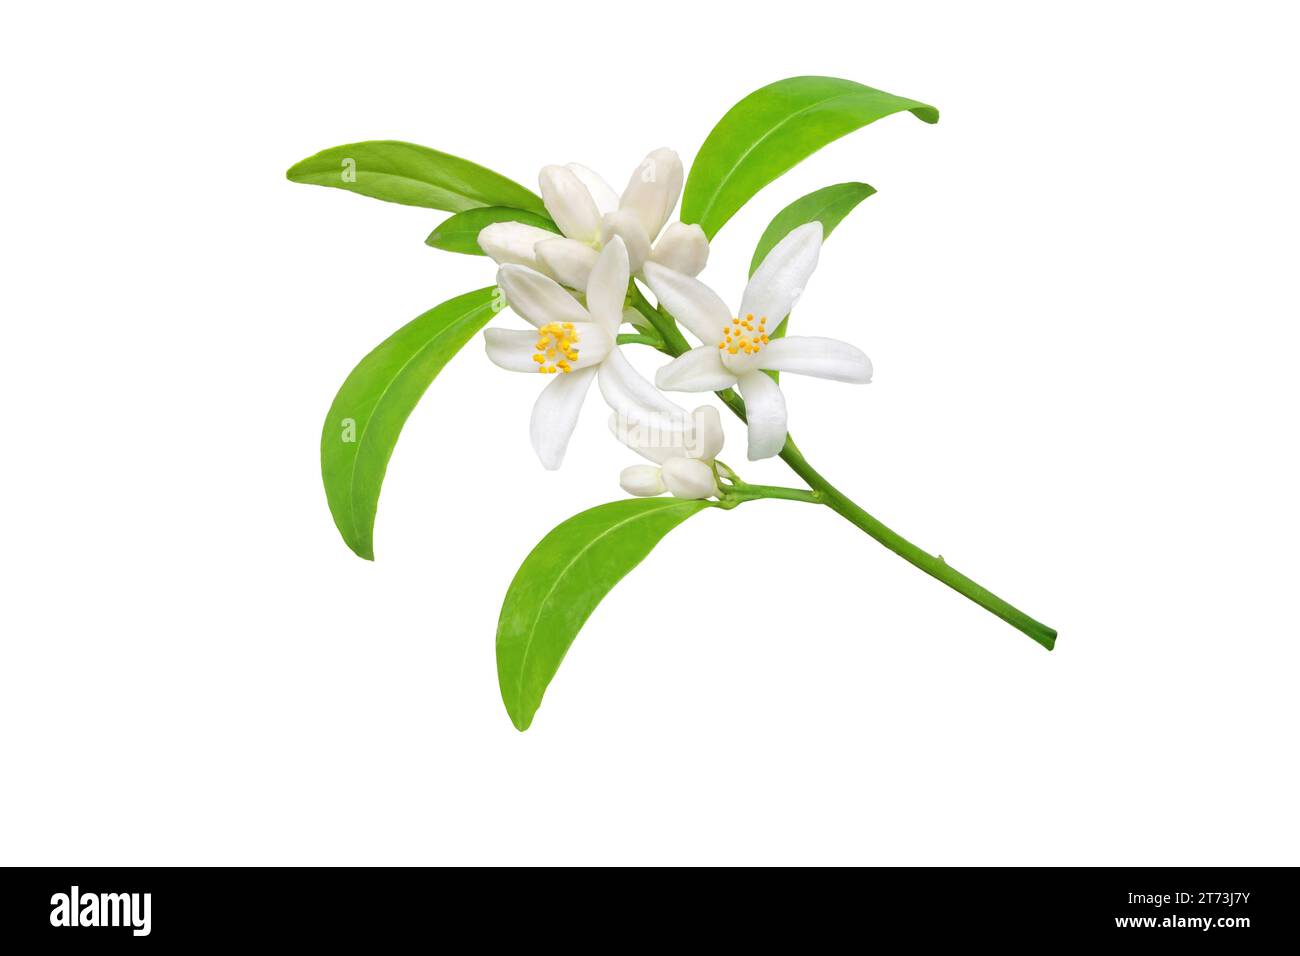 White orange tree flowers, buds and leaves branch isolated on white. Calamondin citrus blossom bunch. Stock Photo